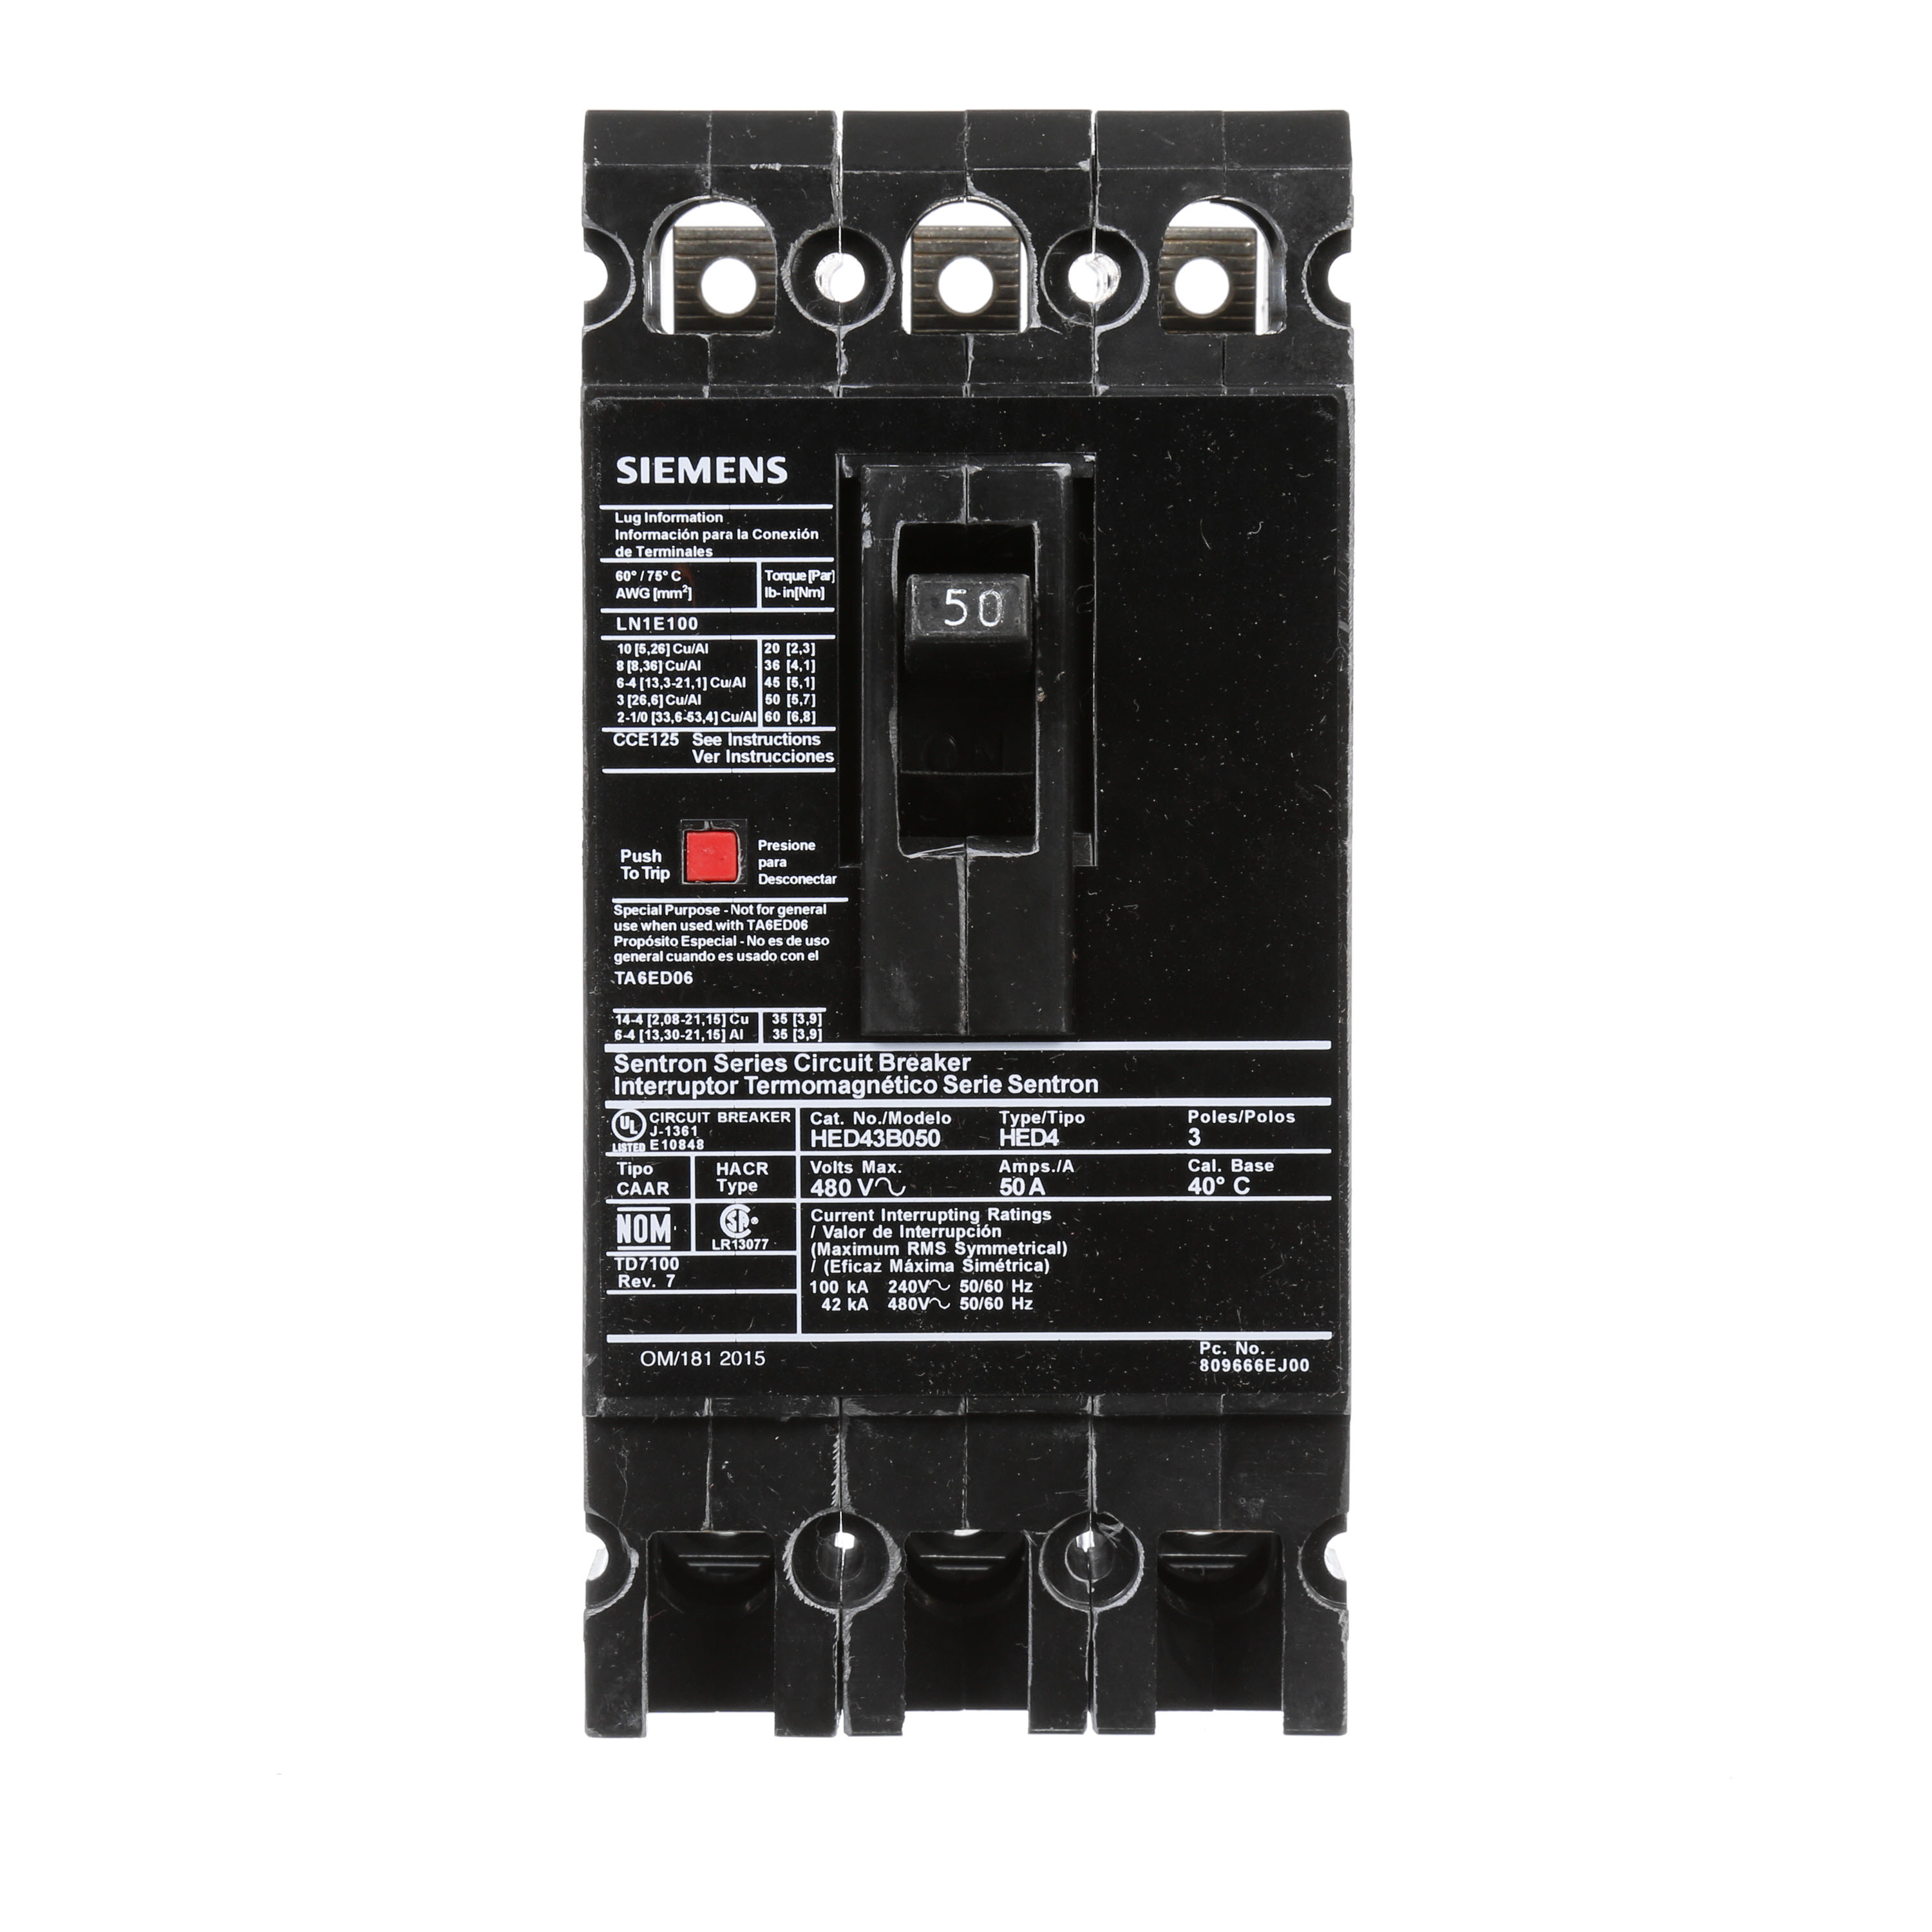 SIEMENS LOW VOLTAGE SENTRON MOLDED CASE CIRCUIT BREAKER WITH THERMAL - MAGNETICTRIP UNIT. STANDARD 40 DEG C BREAKER ED FRAME WITH HIGH BREAKING CAPACITY. 50A 3-POLE (42KAIC AT 480V). NON-INTERCHANGEABLE TRIP UNIT. SPECIAL FEATURES LOAD LUGS ONLY (LN1E100) WIRE RANGE 10 - 1/0AWG (CU/AL). DIMENSIONS (W x H x D) IN 3.00x 6.4 x 3.92.